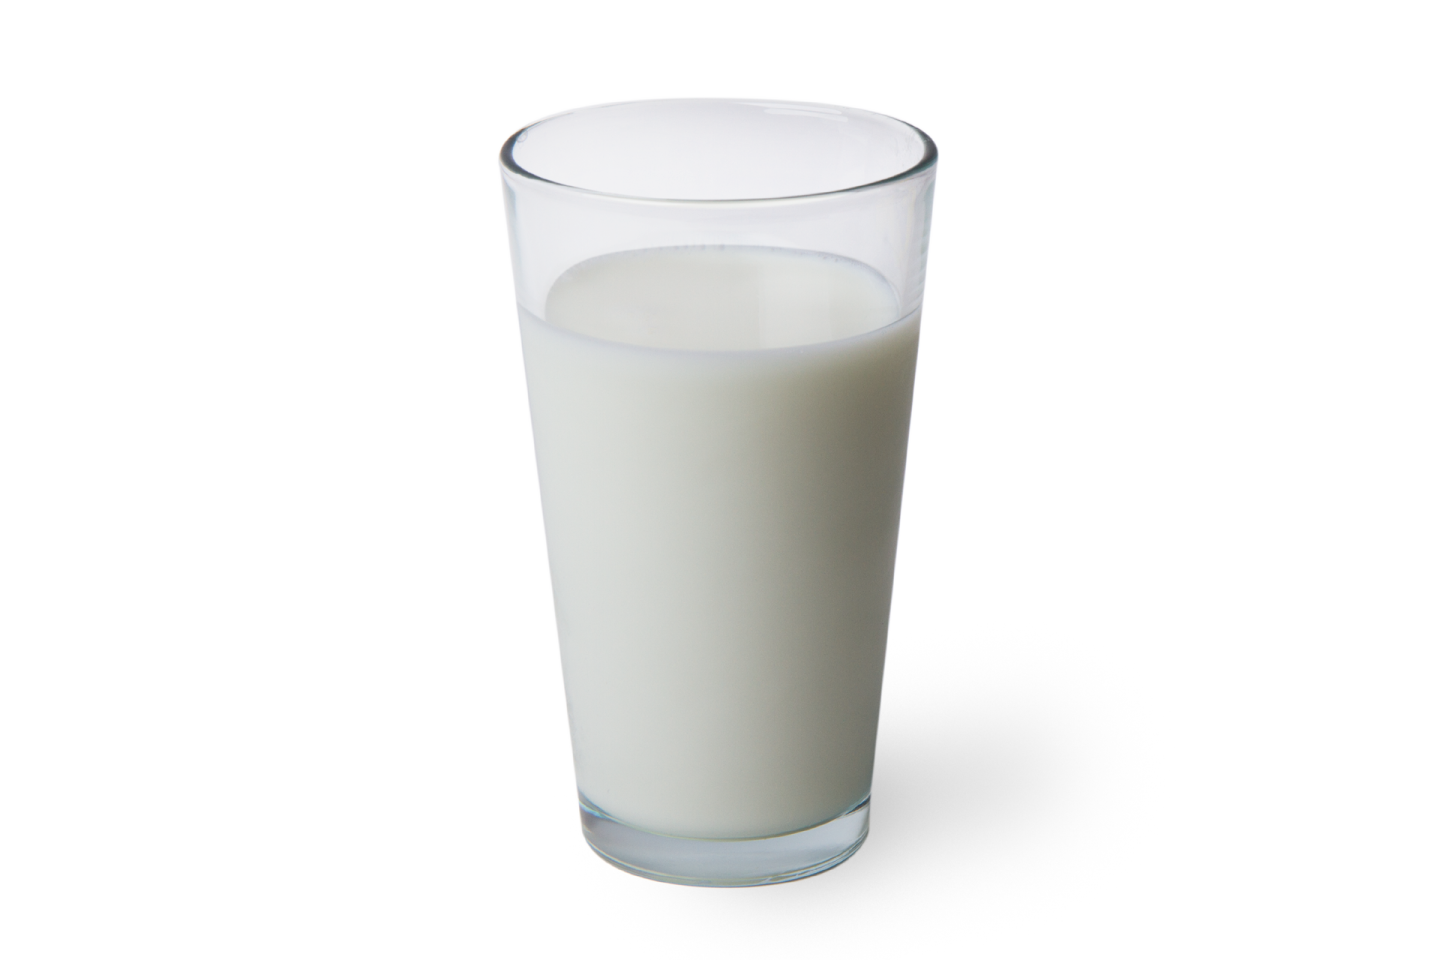 Is Milk Good or Bad for You? | KQED Education